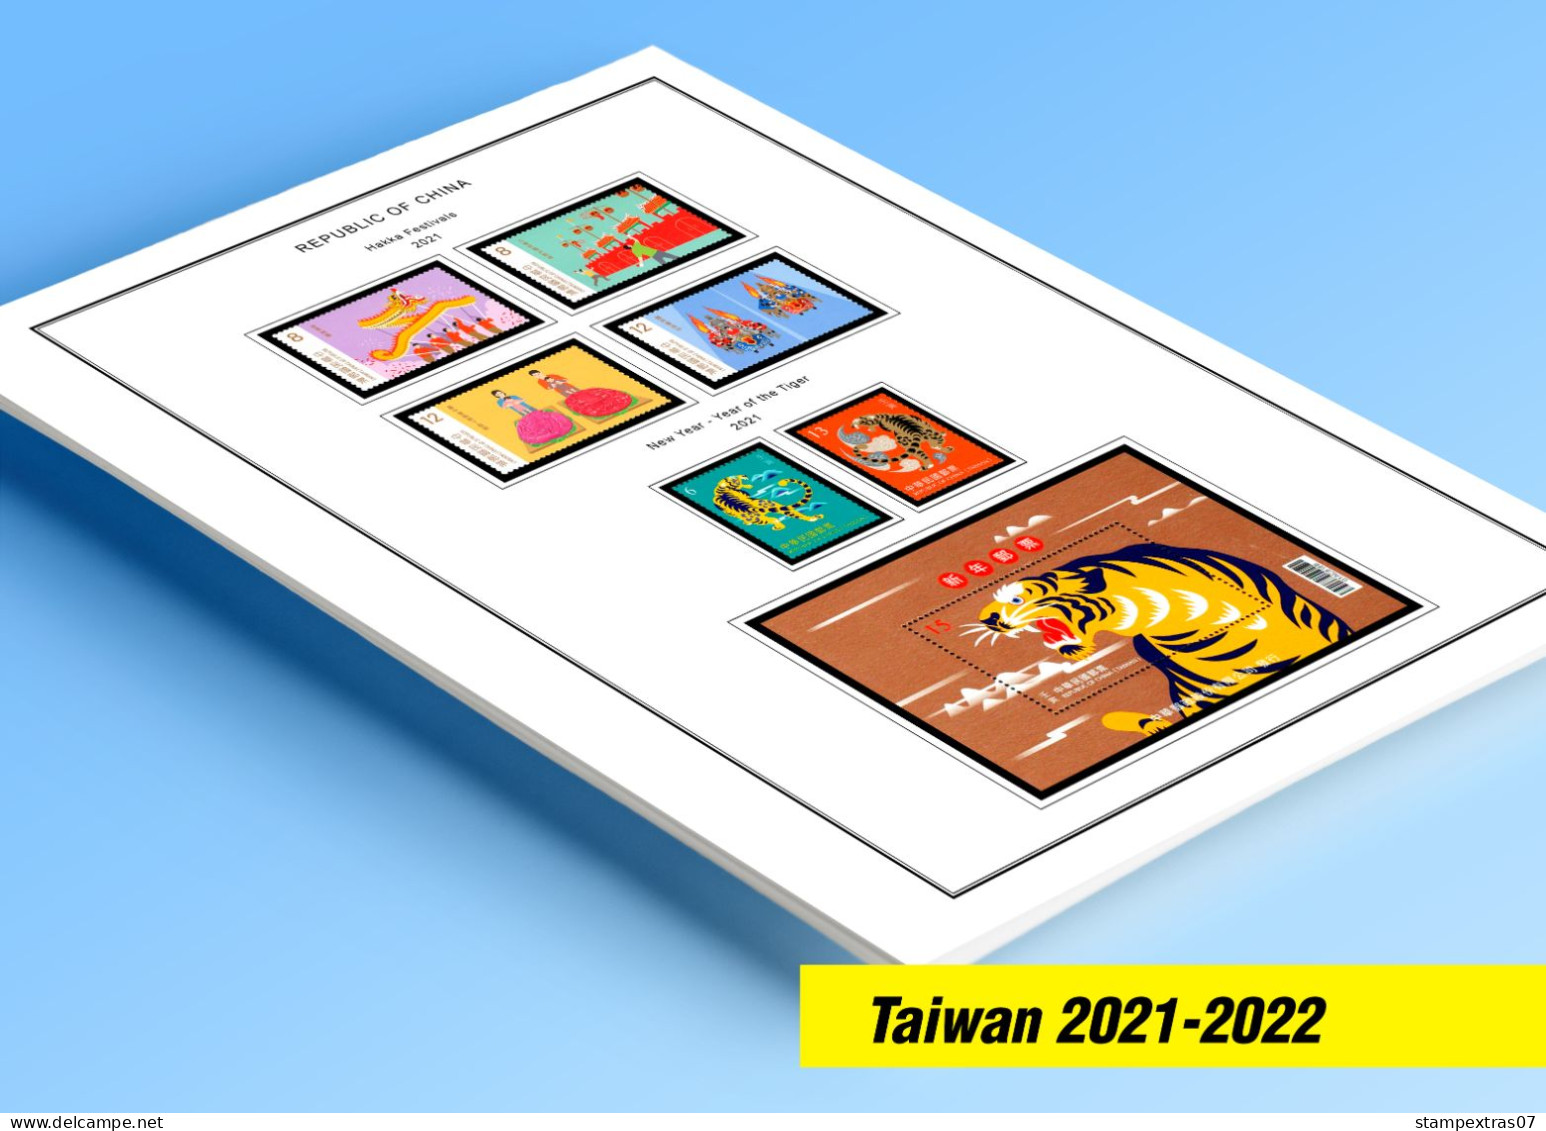 COLOR PRINTED TAIWAN [R.O.C.] 2021-2022 STAMP ALBUM PAGES (16 Illustrated Pages) >> FEUILLES ALBUM - Pre-printed Pages